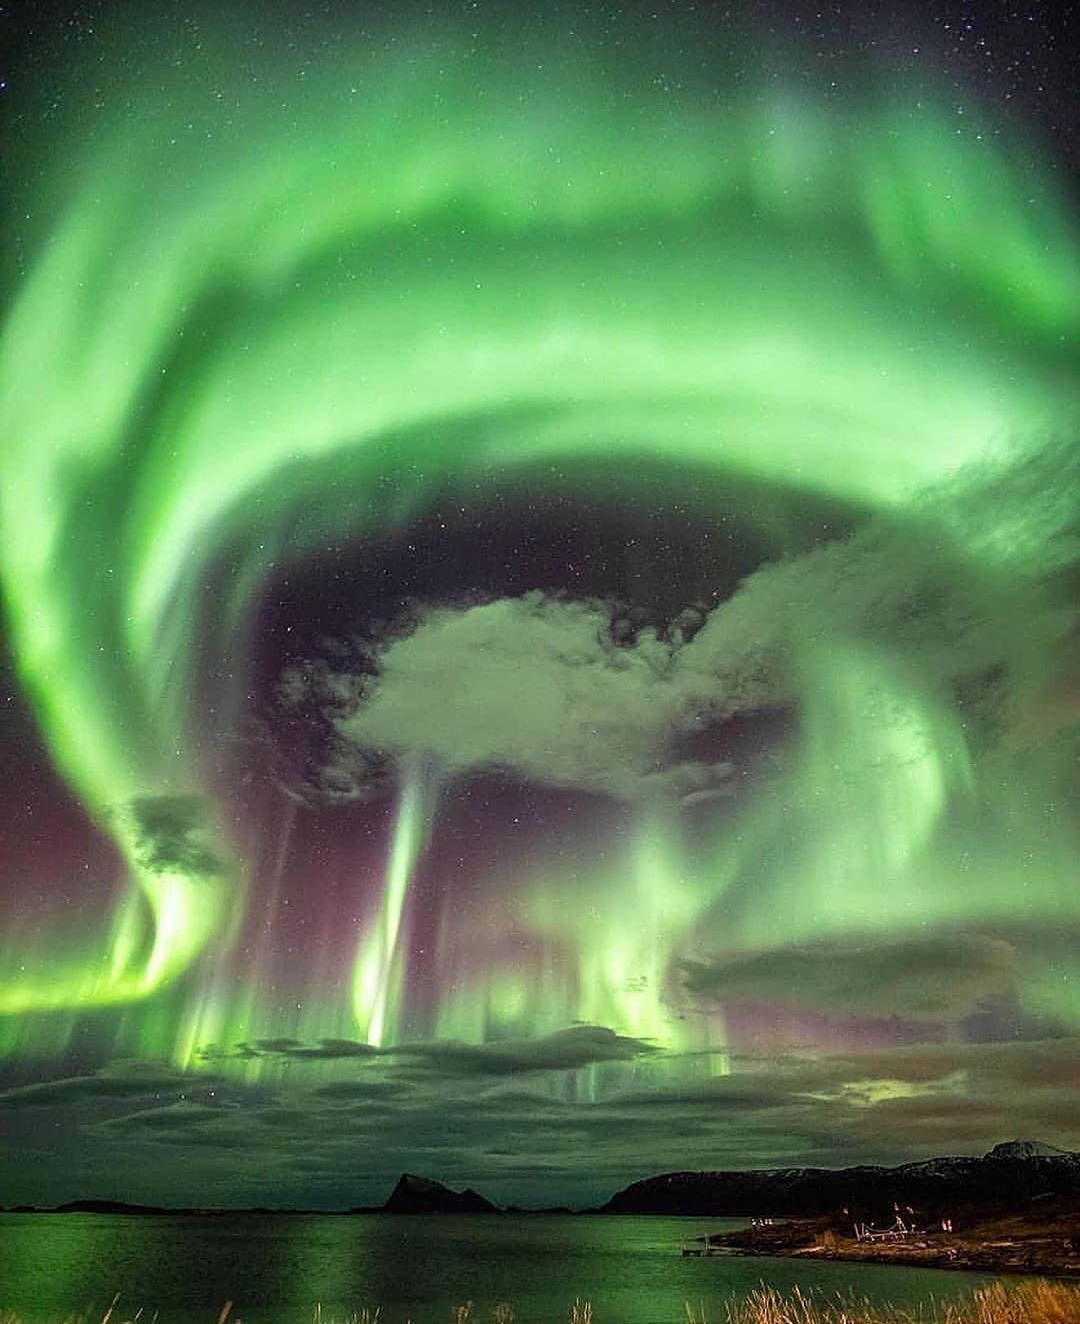 Auroras that occur in the northern hemisphere are called ‘Aurora Borealis’ or ‘northern lights’ and auroras that occur in the southern hempishere are called ‘Aurora Australis’ or ‘southern lights’.